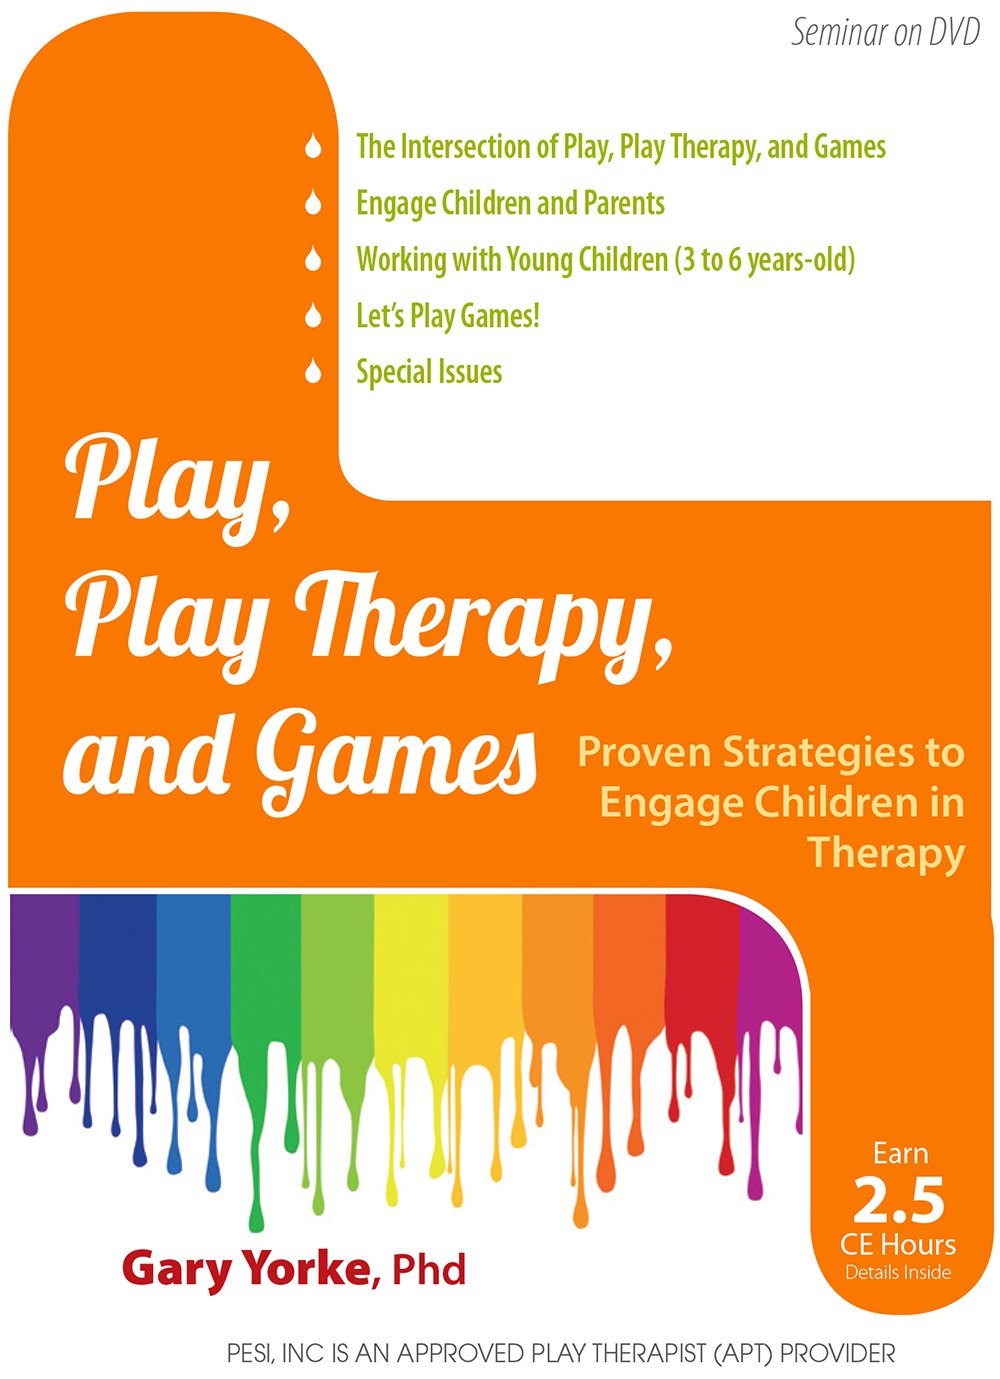 Play, Play Therapy, and Games: Proven Strategies to Engage Children in Therapy - Gary G. F. Yorke